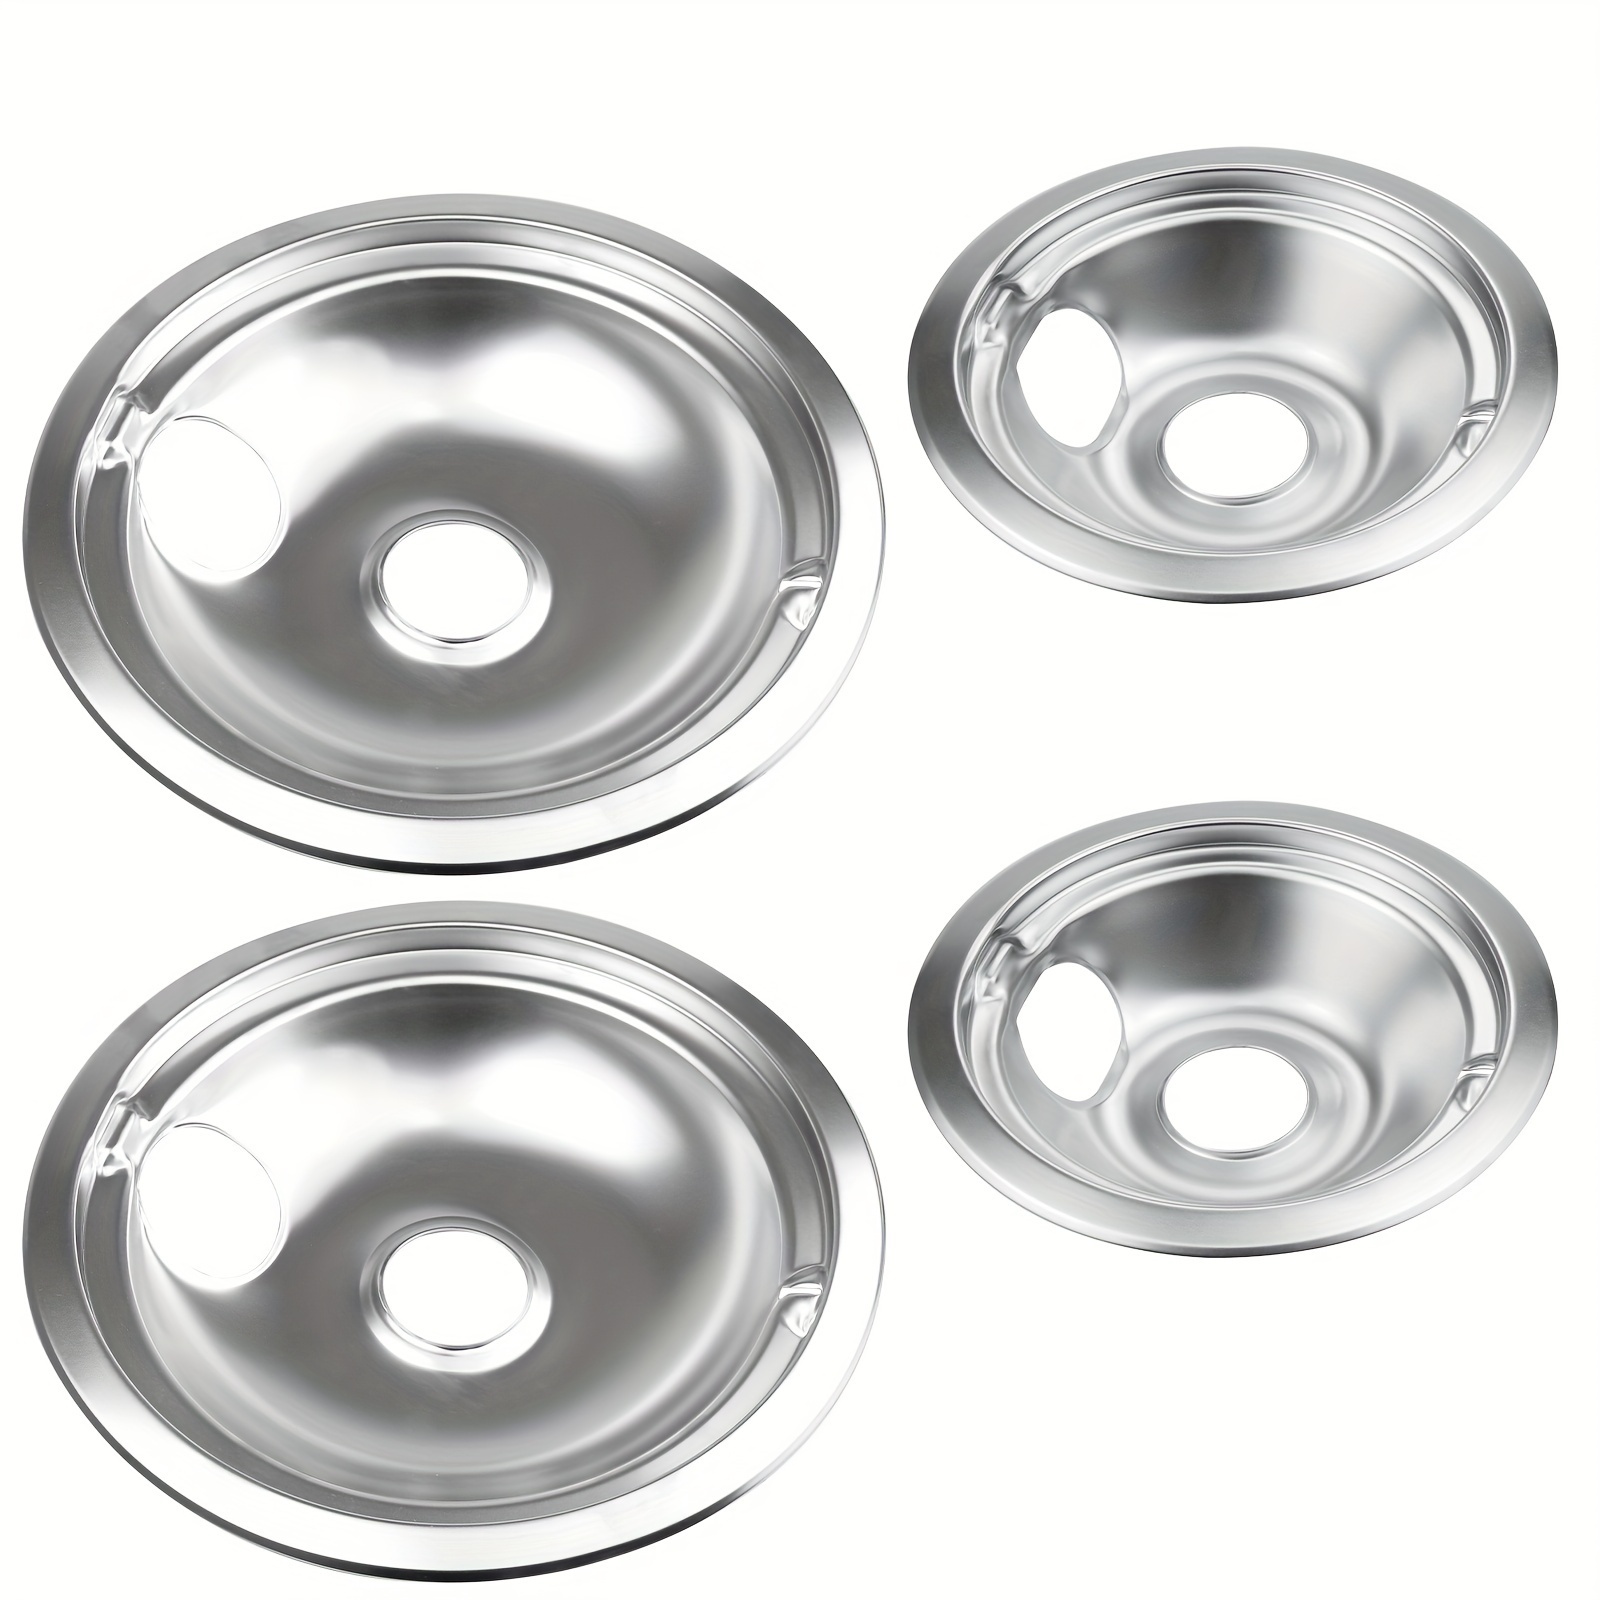 WB31M15 & WB31M16 Drip Pans Compatible Replacement for GE/Hotpoint Electric Range Stove Burner Covers General Electric Stove Parts & Hotpoint Stove